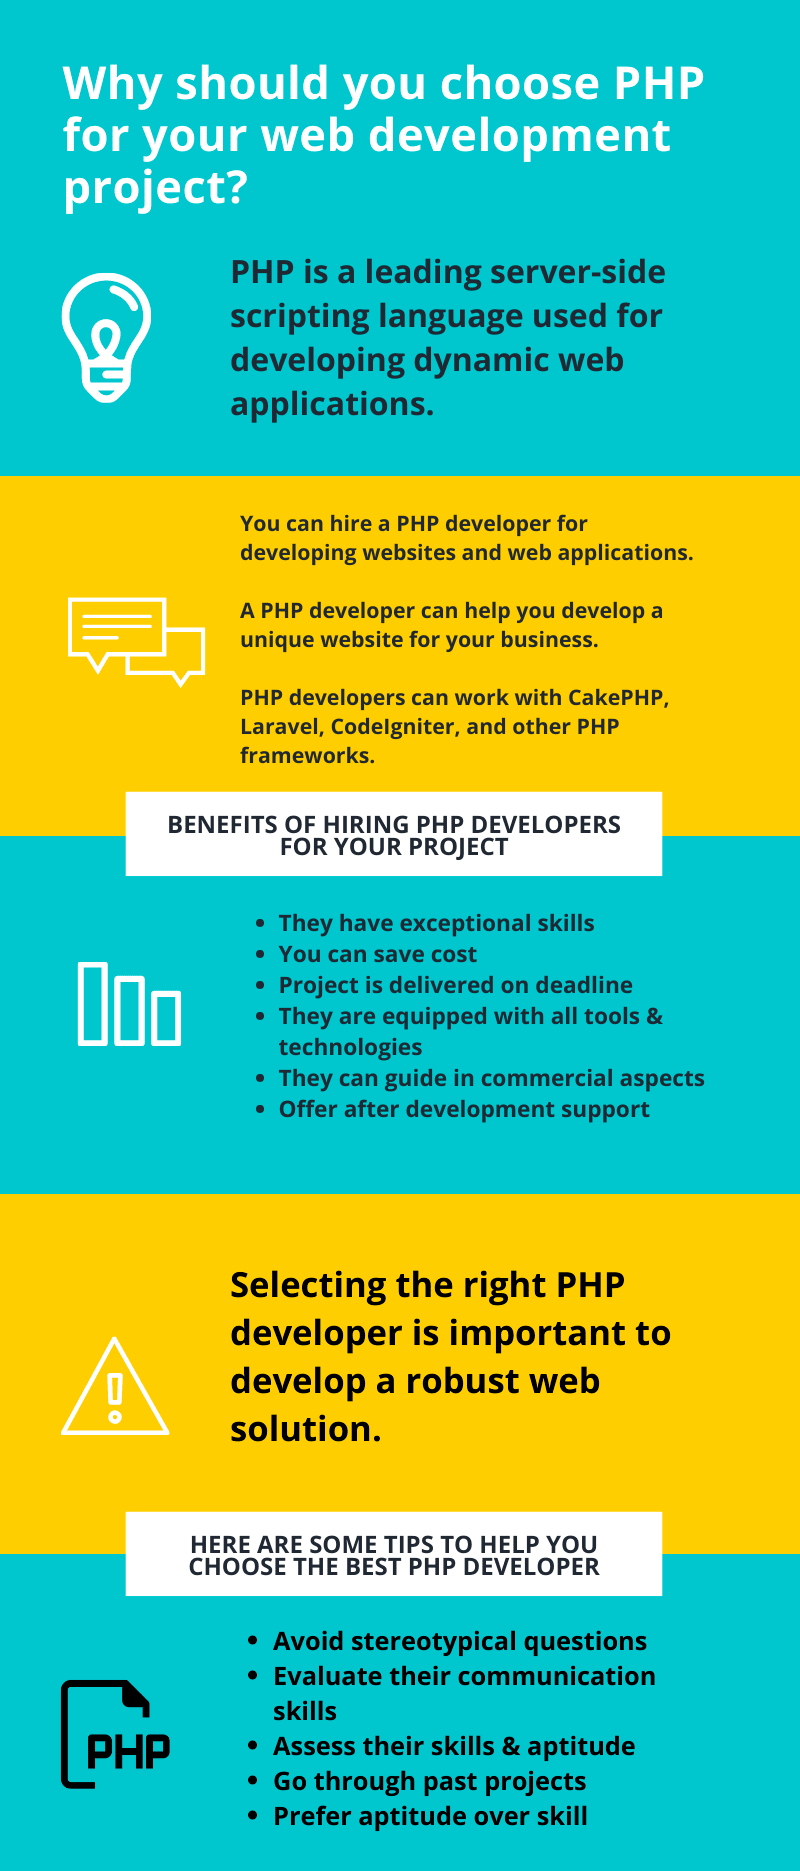 Benefits of PHP for building Web Apps